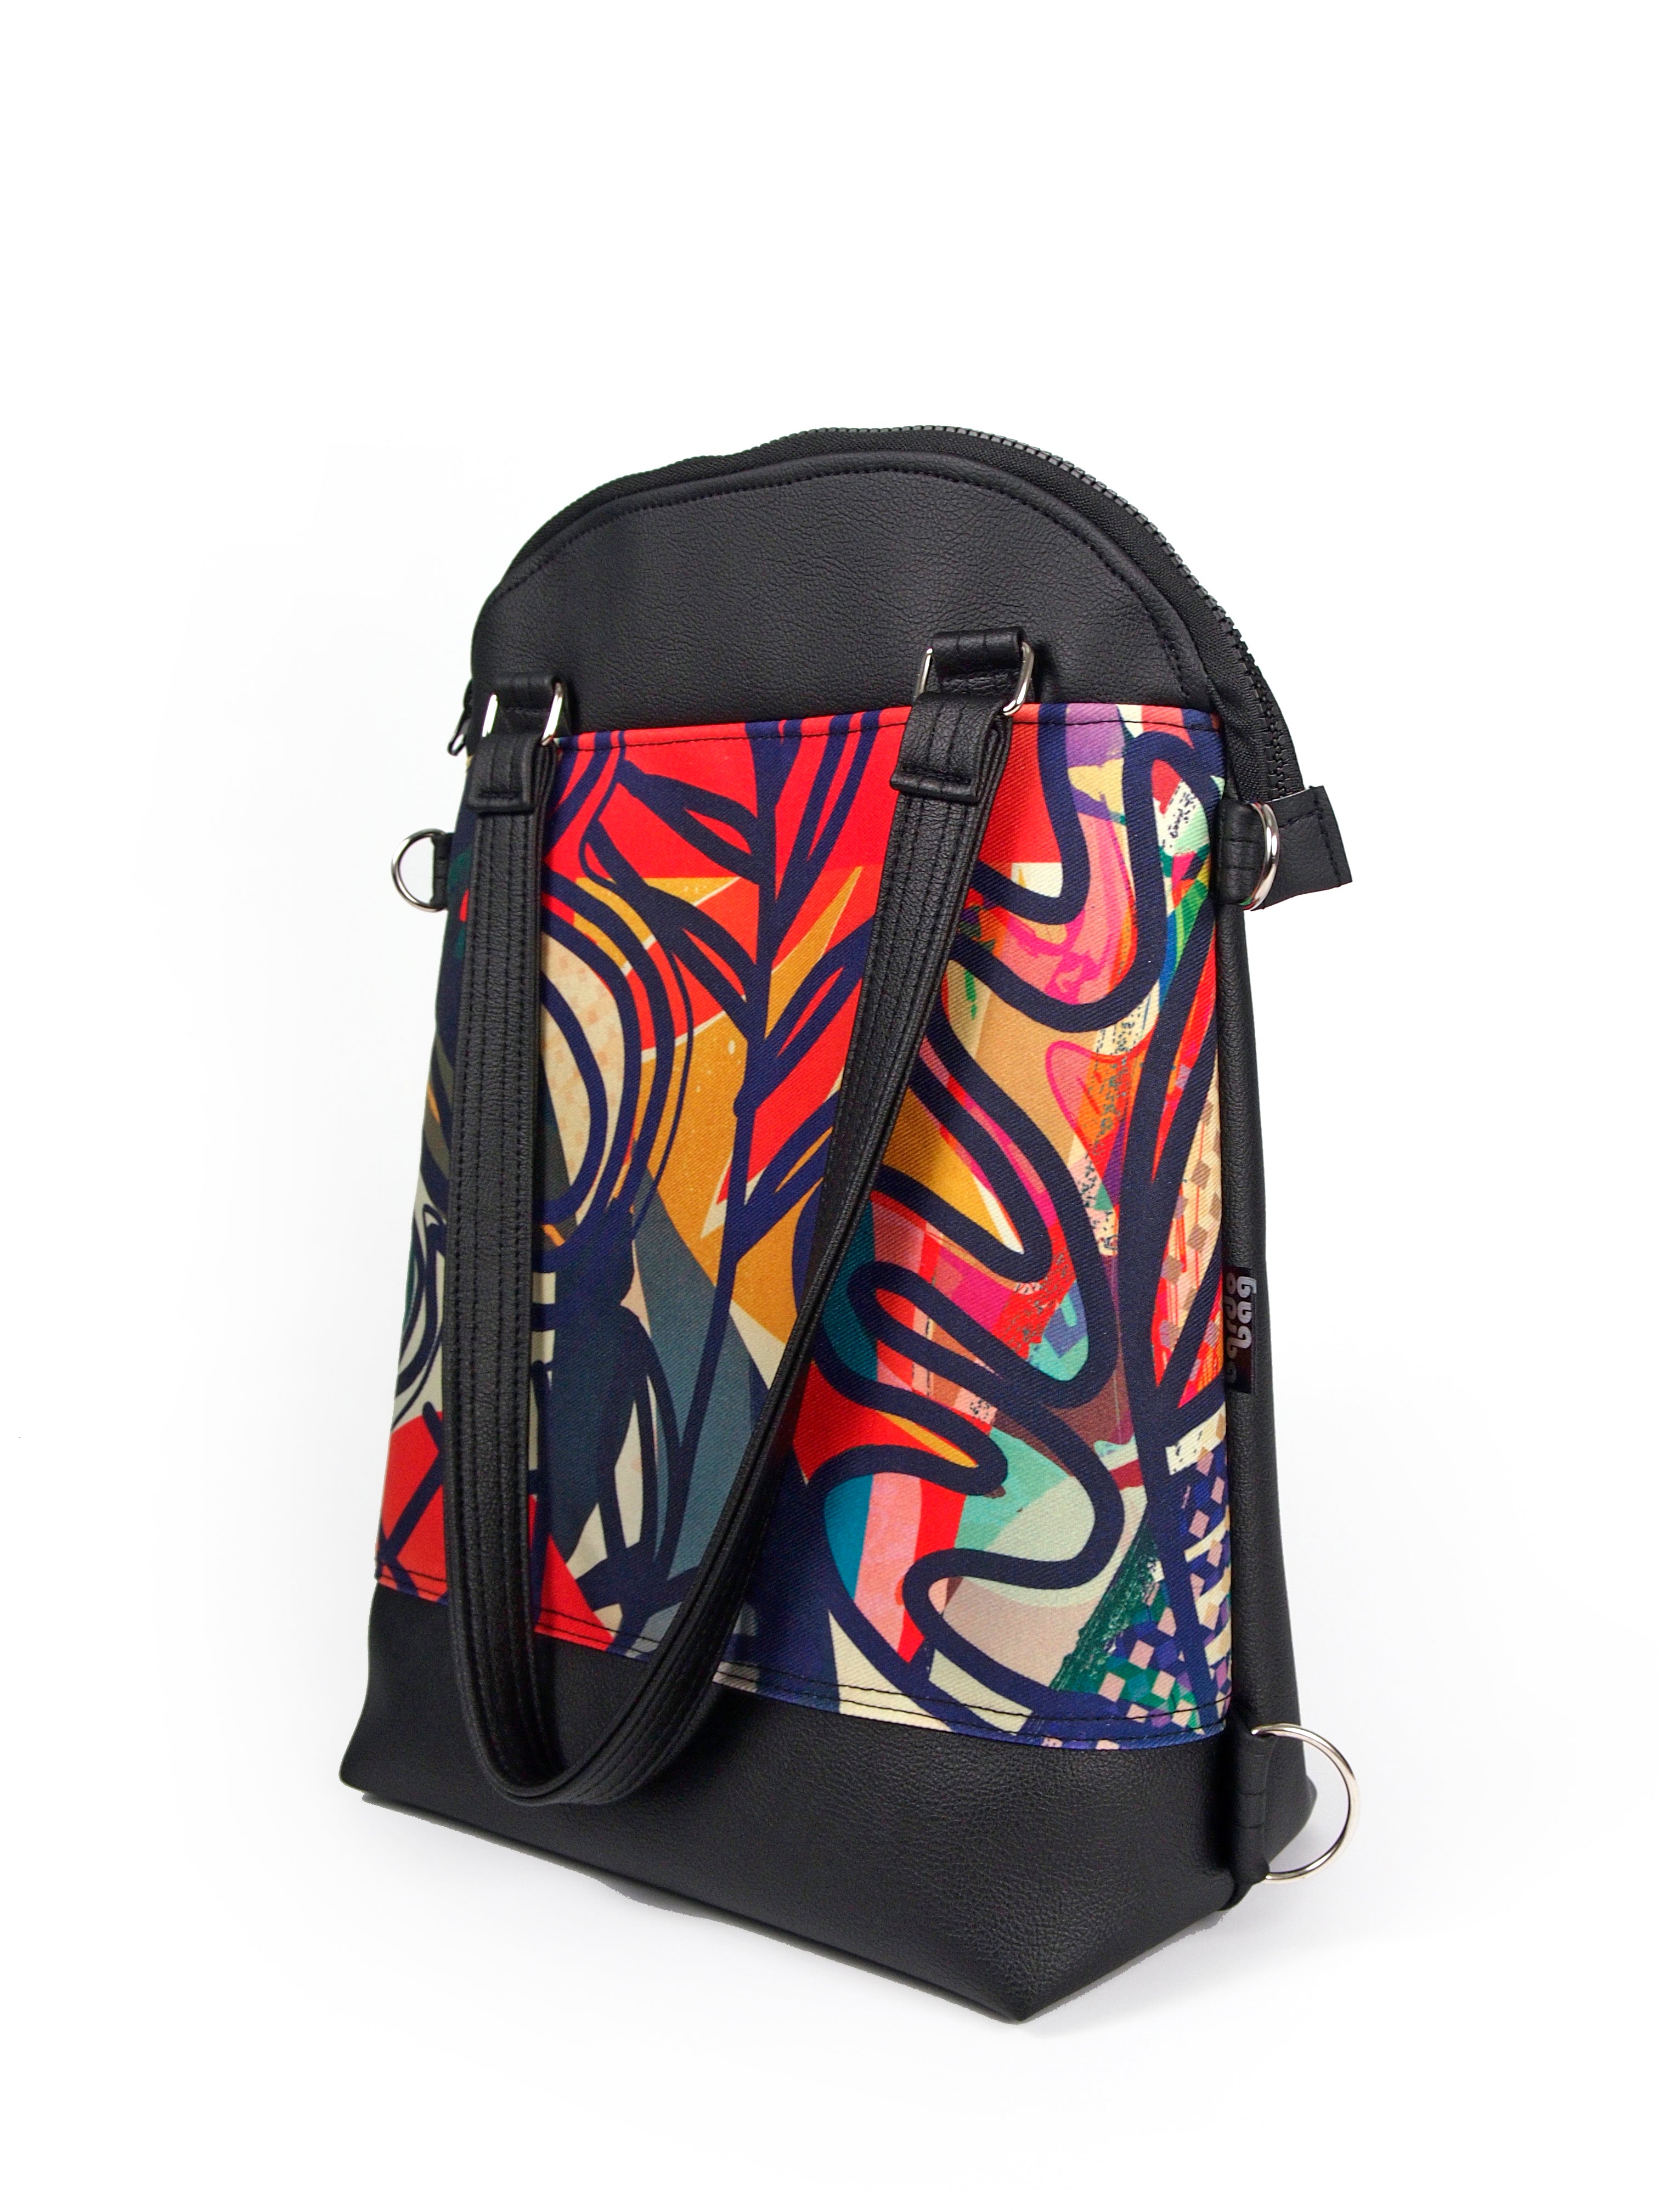 Bardo classic bag and backpack - Summer abstraction - Premium  from BARDO ART WORKS - Just lv89.00! Shop now at BARDO ART WORKS